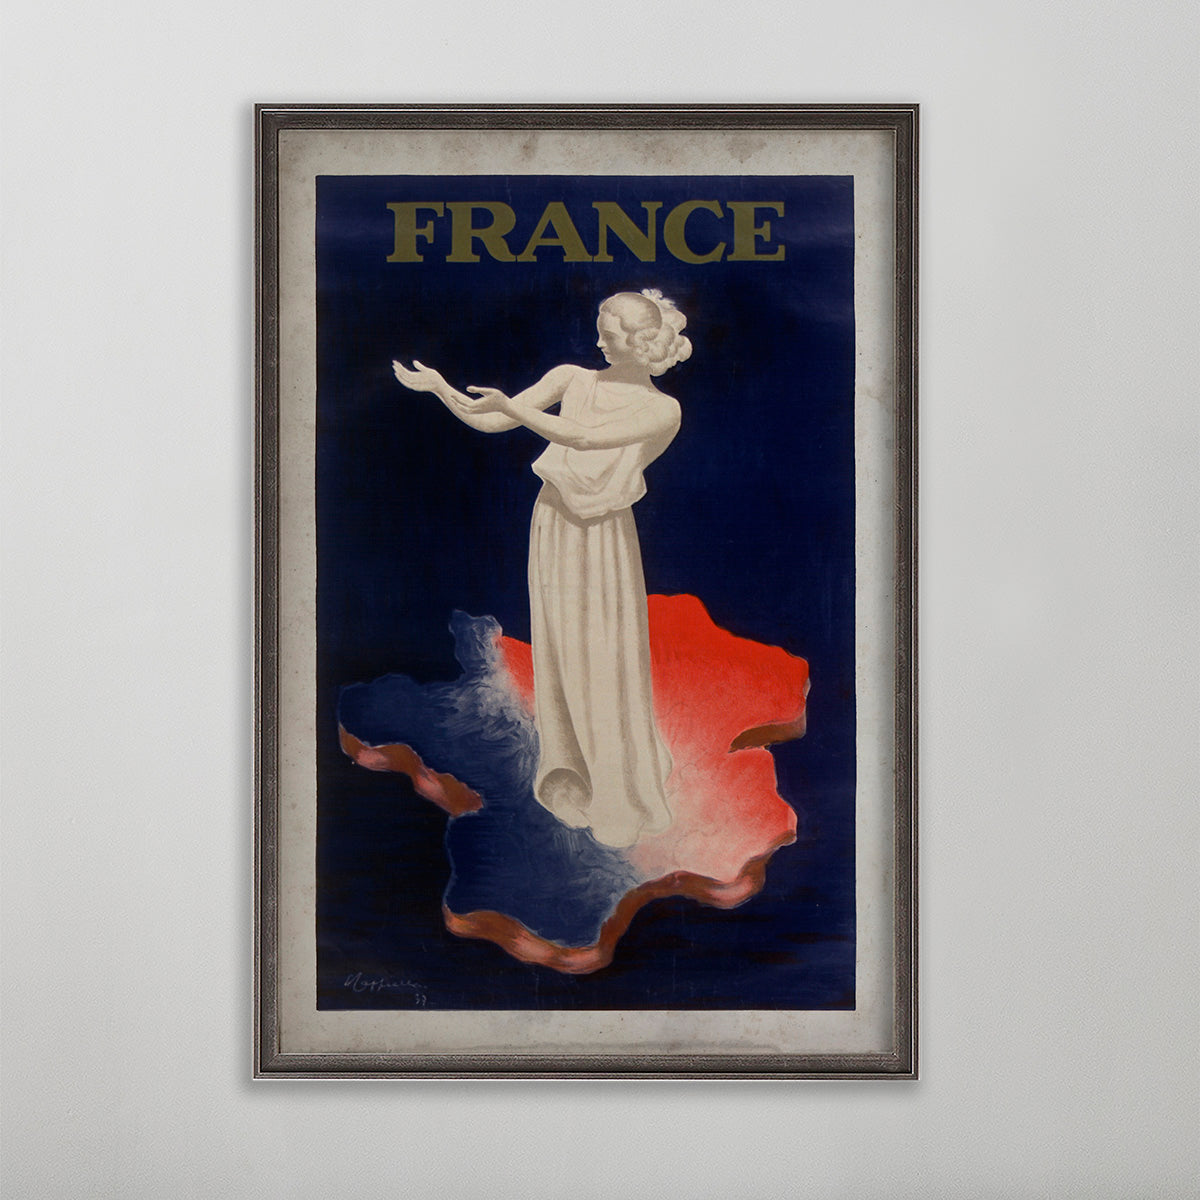 "France" French Olympics vintage poster wall art by leonetto cappiello. White statue of woman.